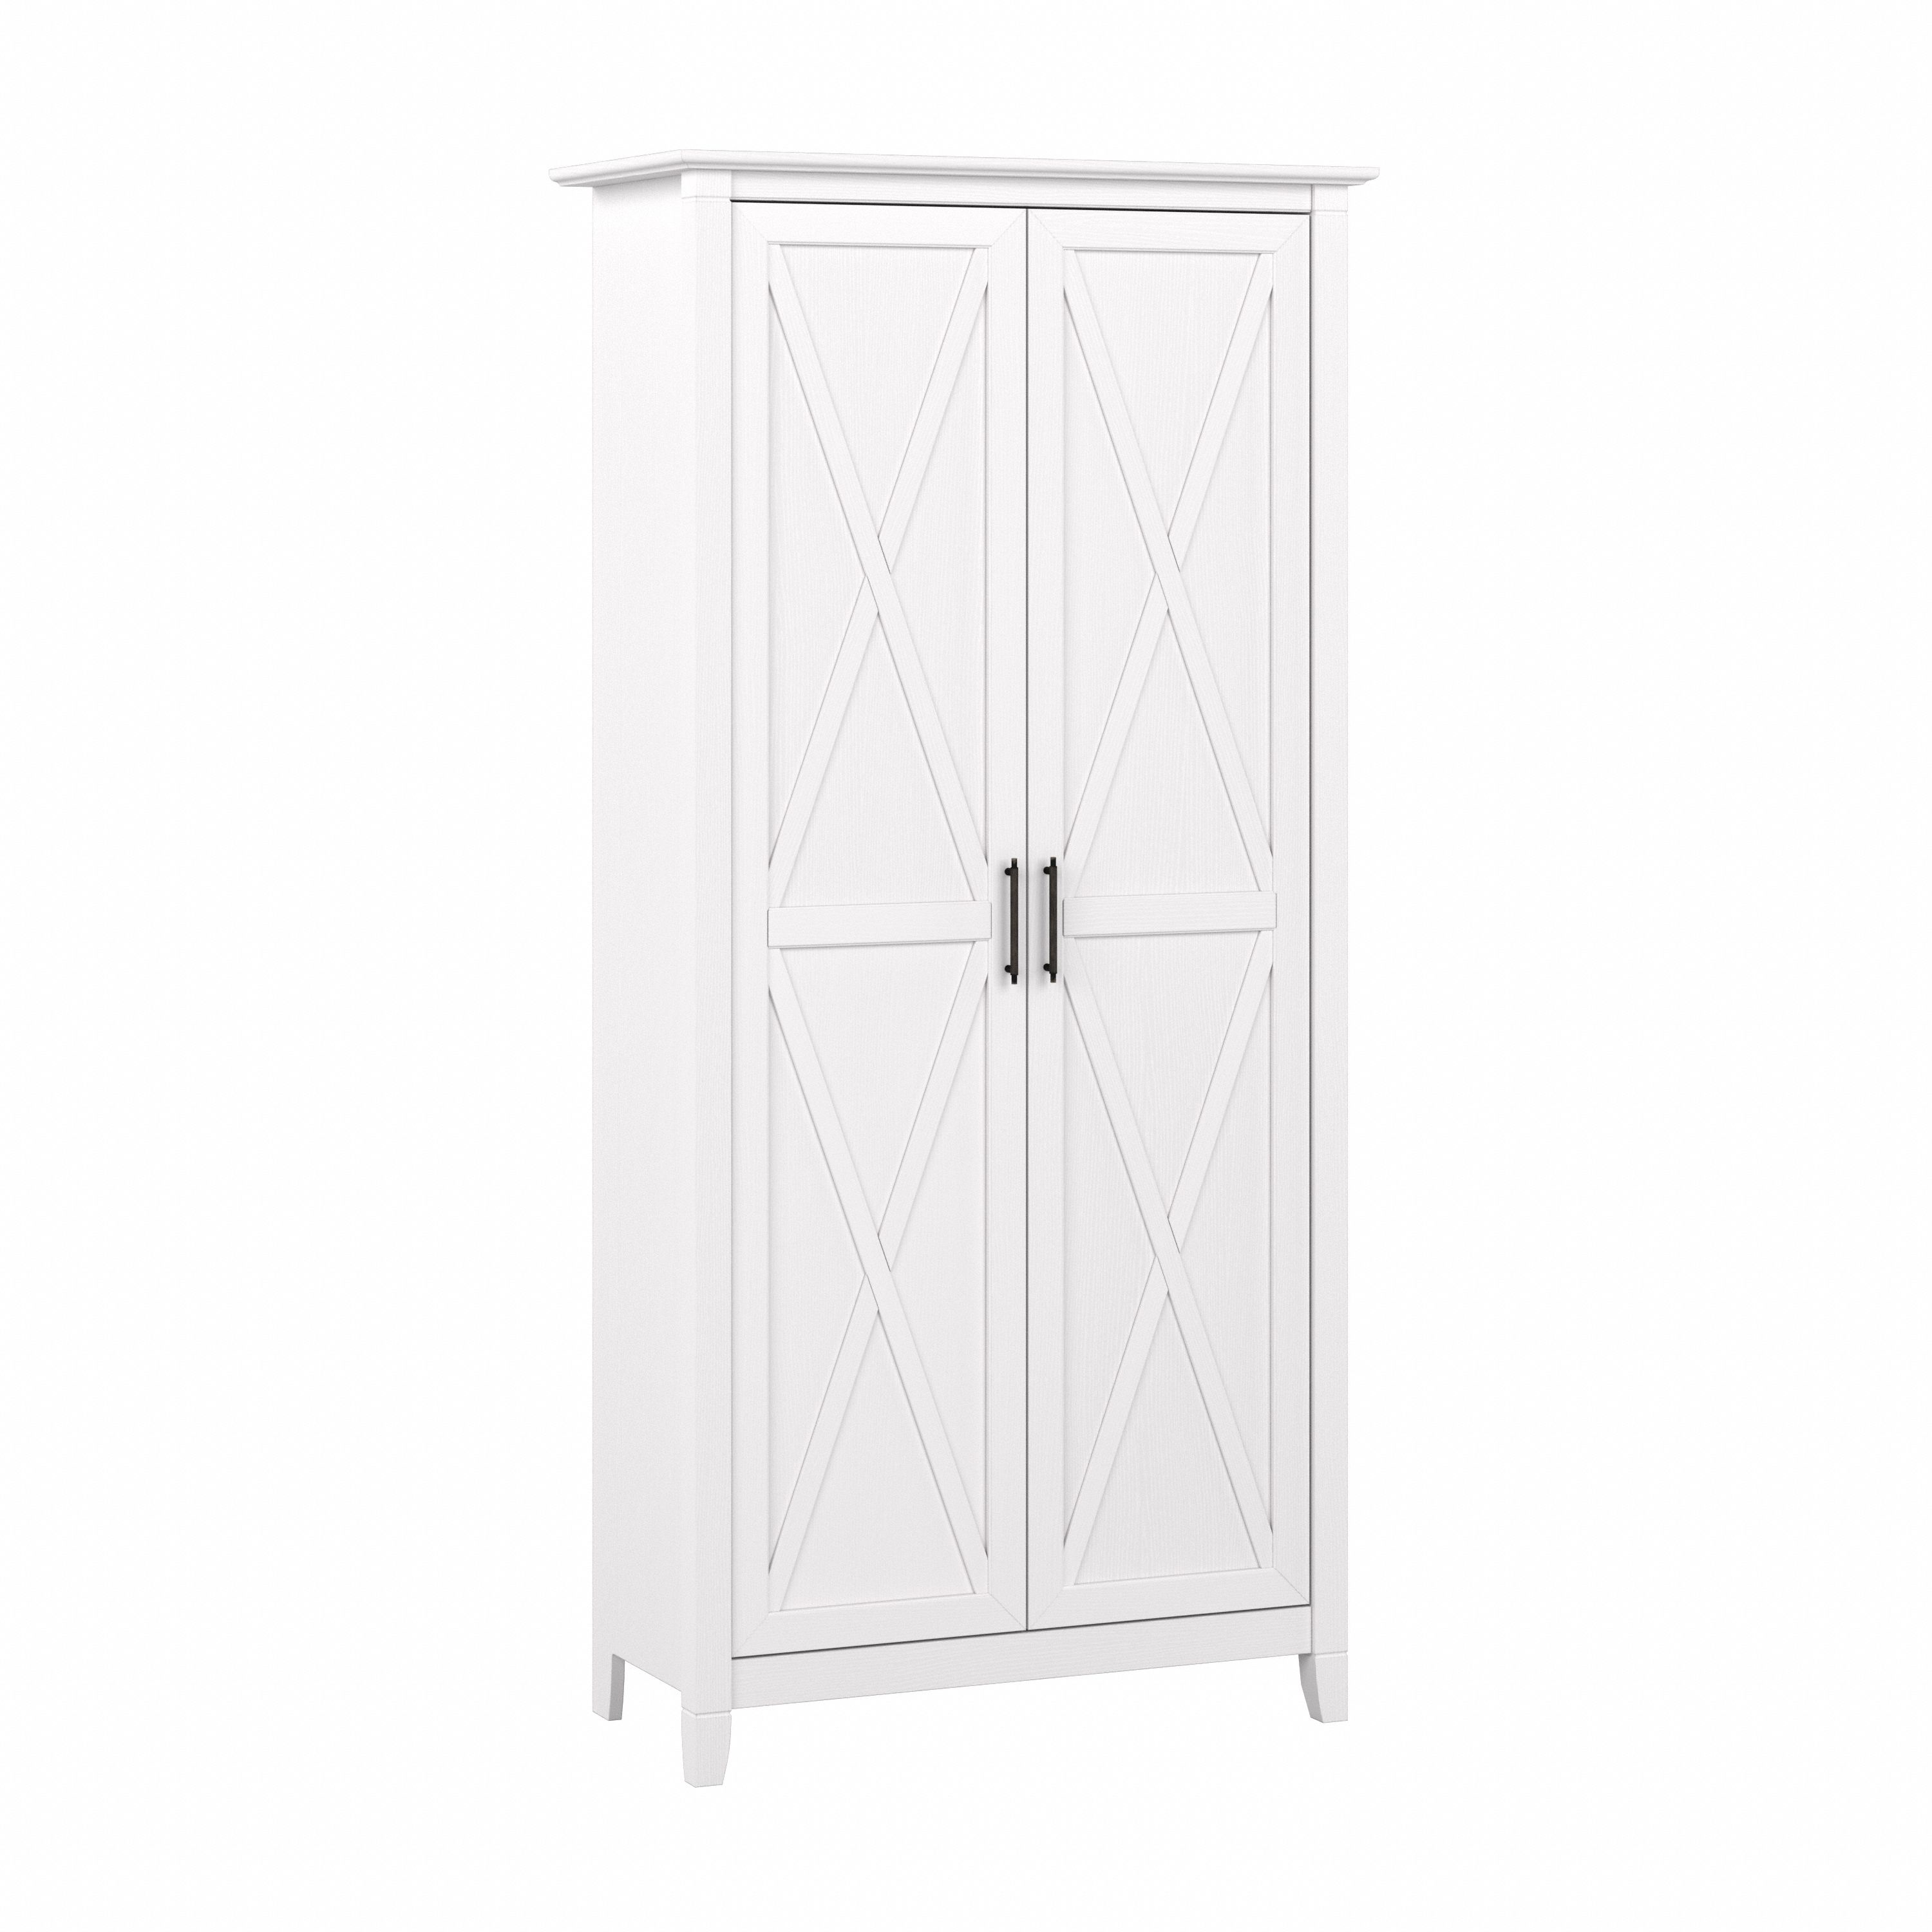 Shop Bush Furniture Key West Tall Storage Cabinet with Doors 02 KWS266WT-03 #color_pure white oak